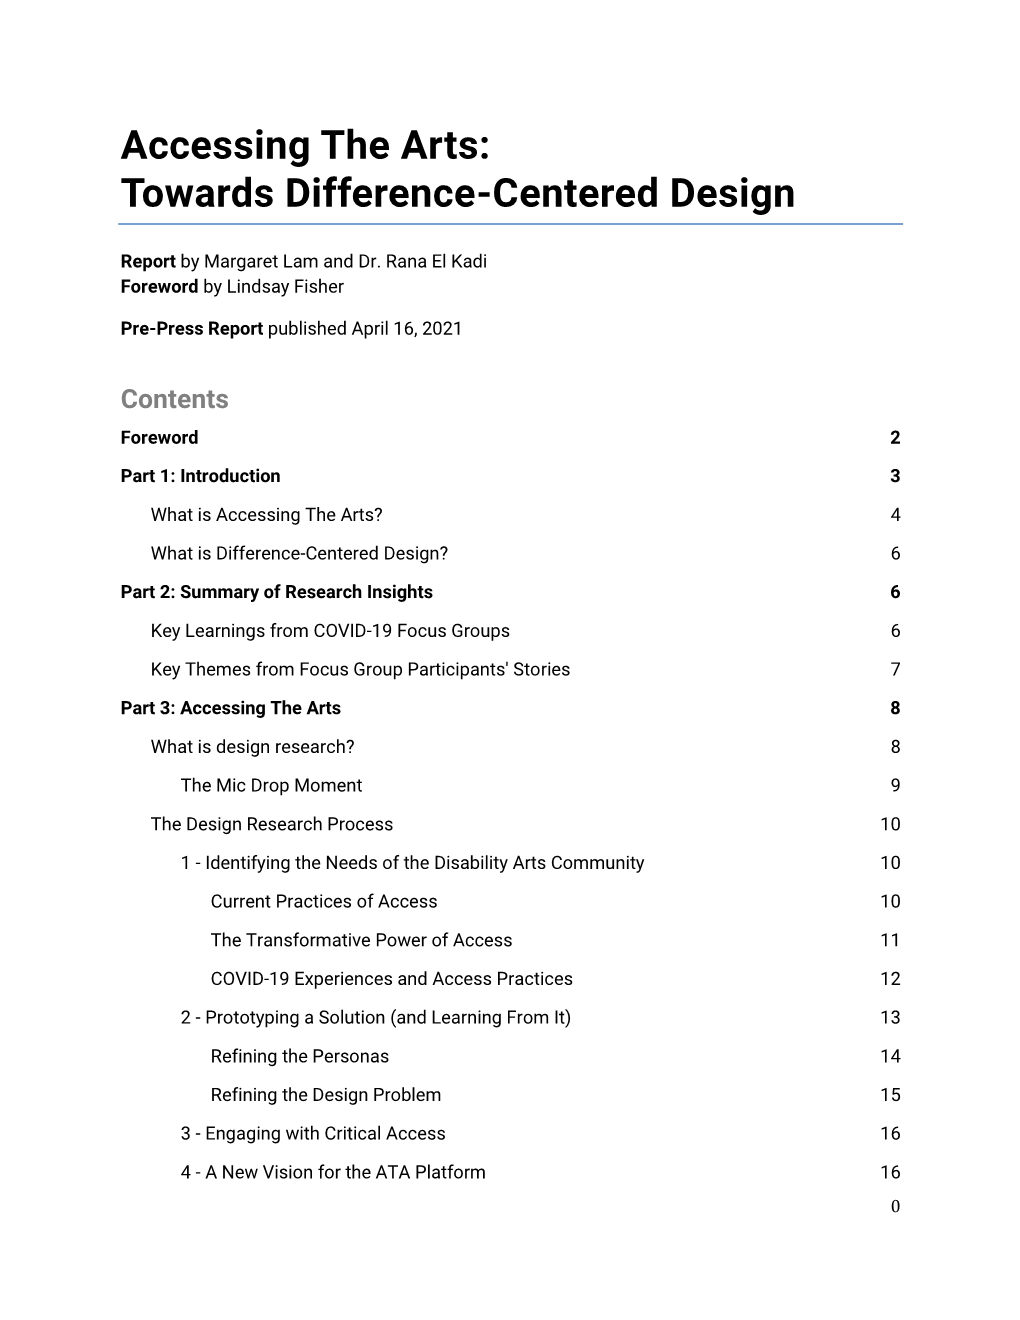 Accessing the Arts: Towards Difference-Centered Design Report